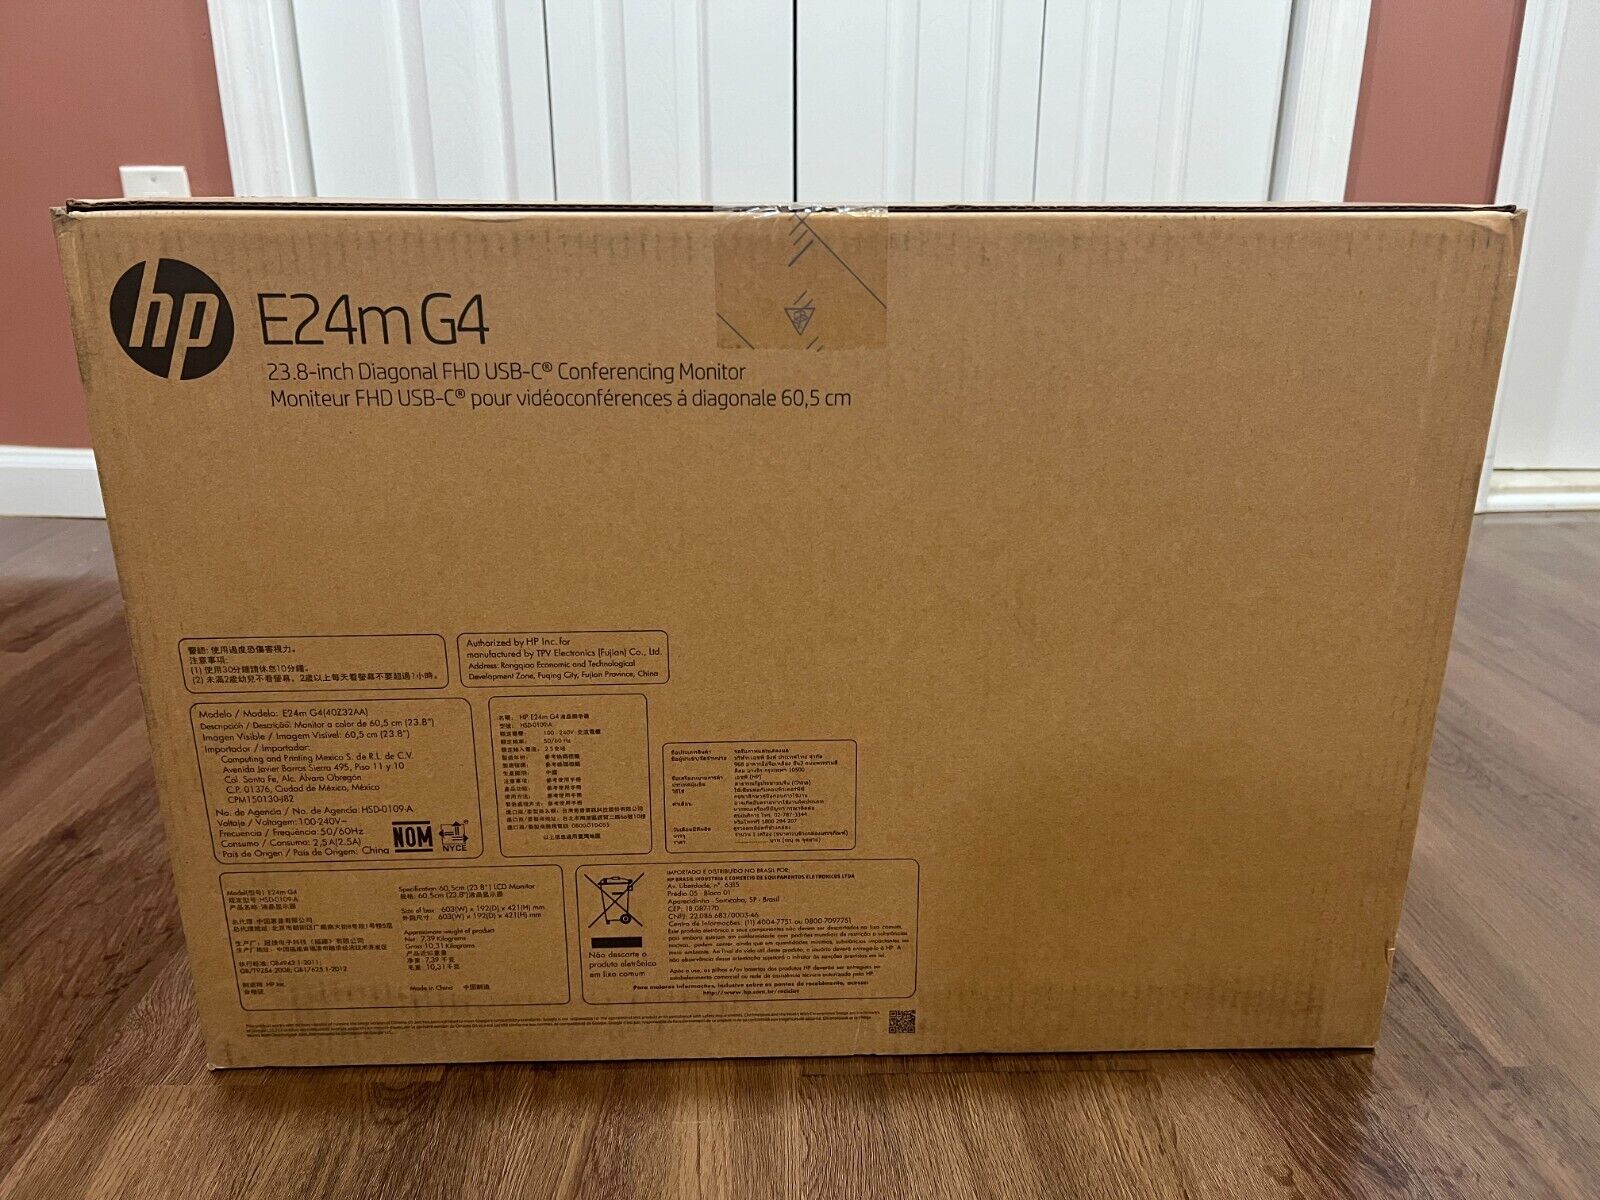 HP E24m G4 23.8 inch Diagonal FHD Monitor (Brand New Unopened)